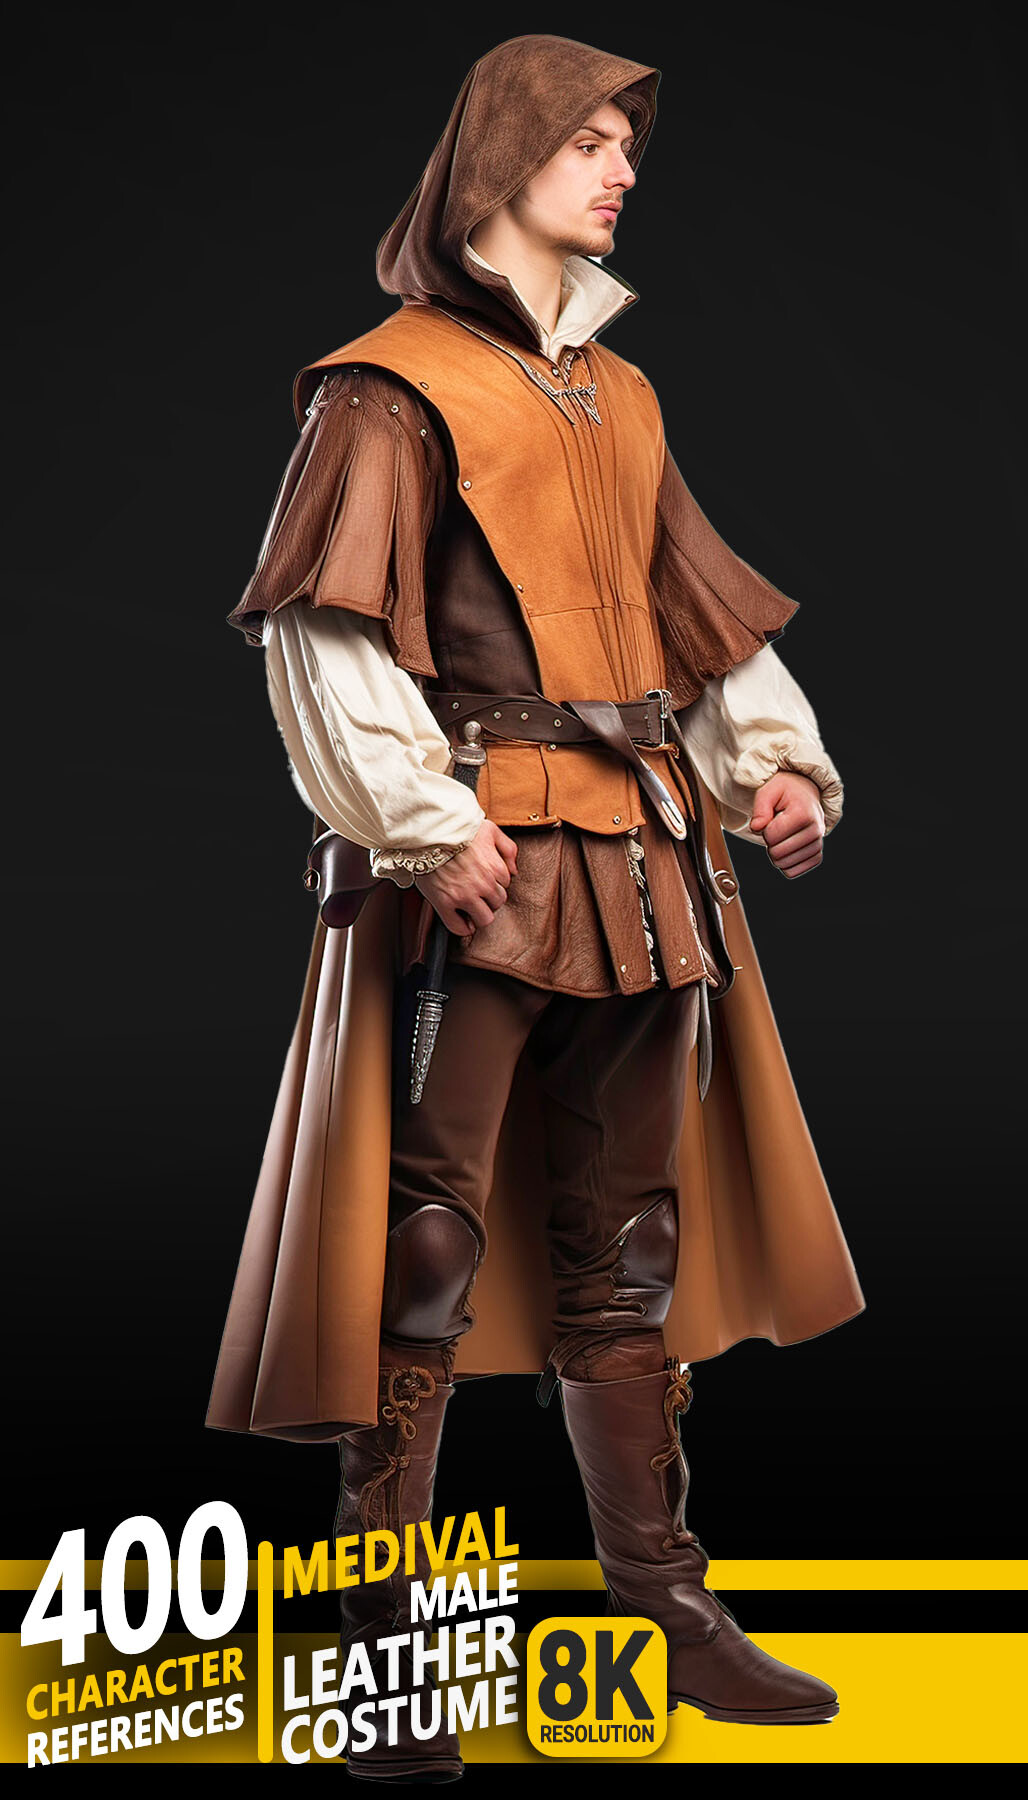 ArtStation - 400 Medieval Male Leather Costume - Character References